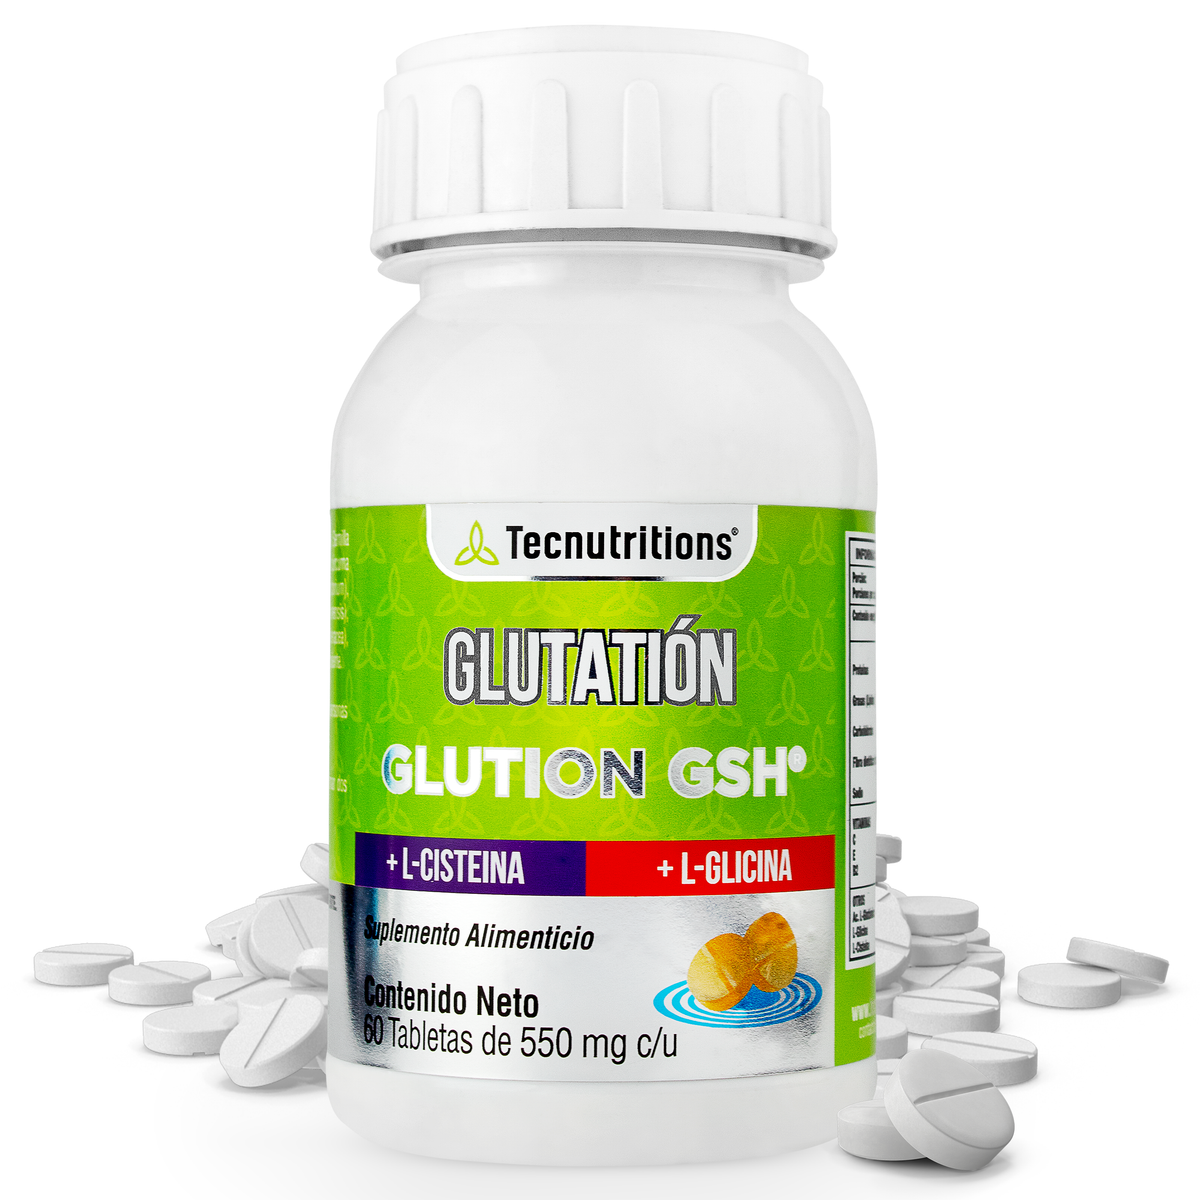 Food supplement with amino acids and antioxidants, Glution GSH, 60 tabl